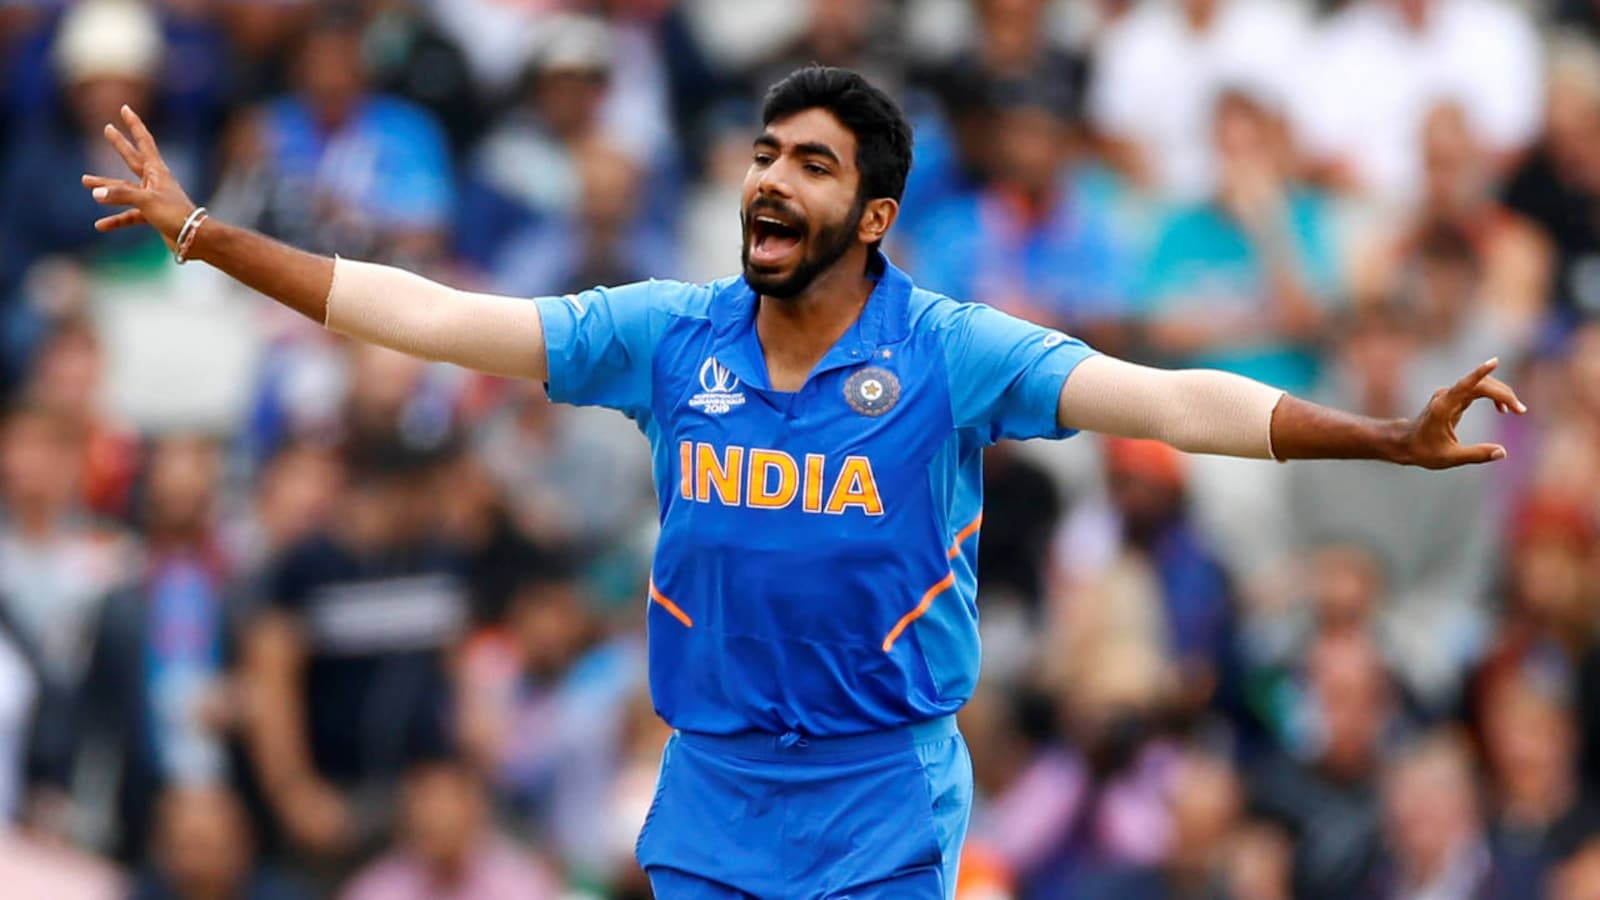 Gutted that I won't be part of T20 World Cup: Jasprit Bumrah